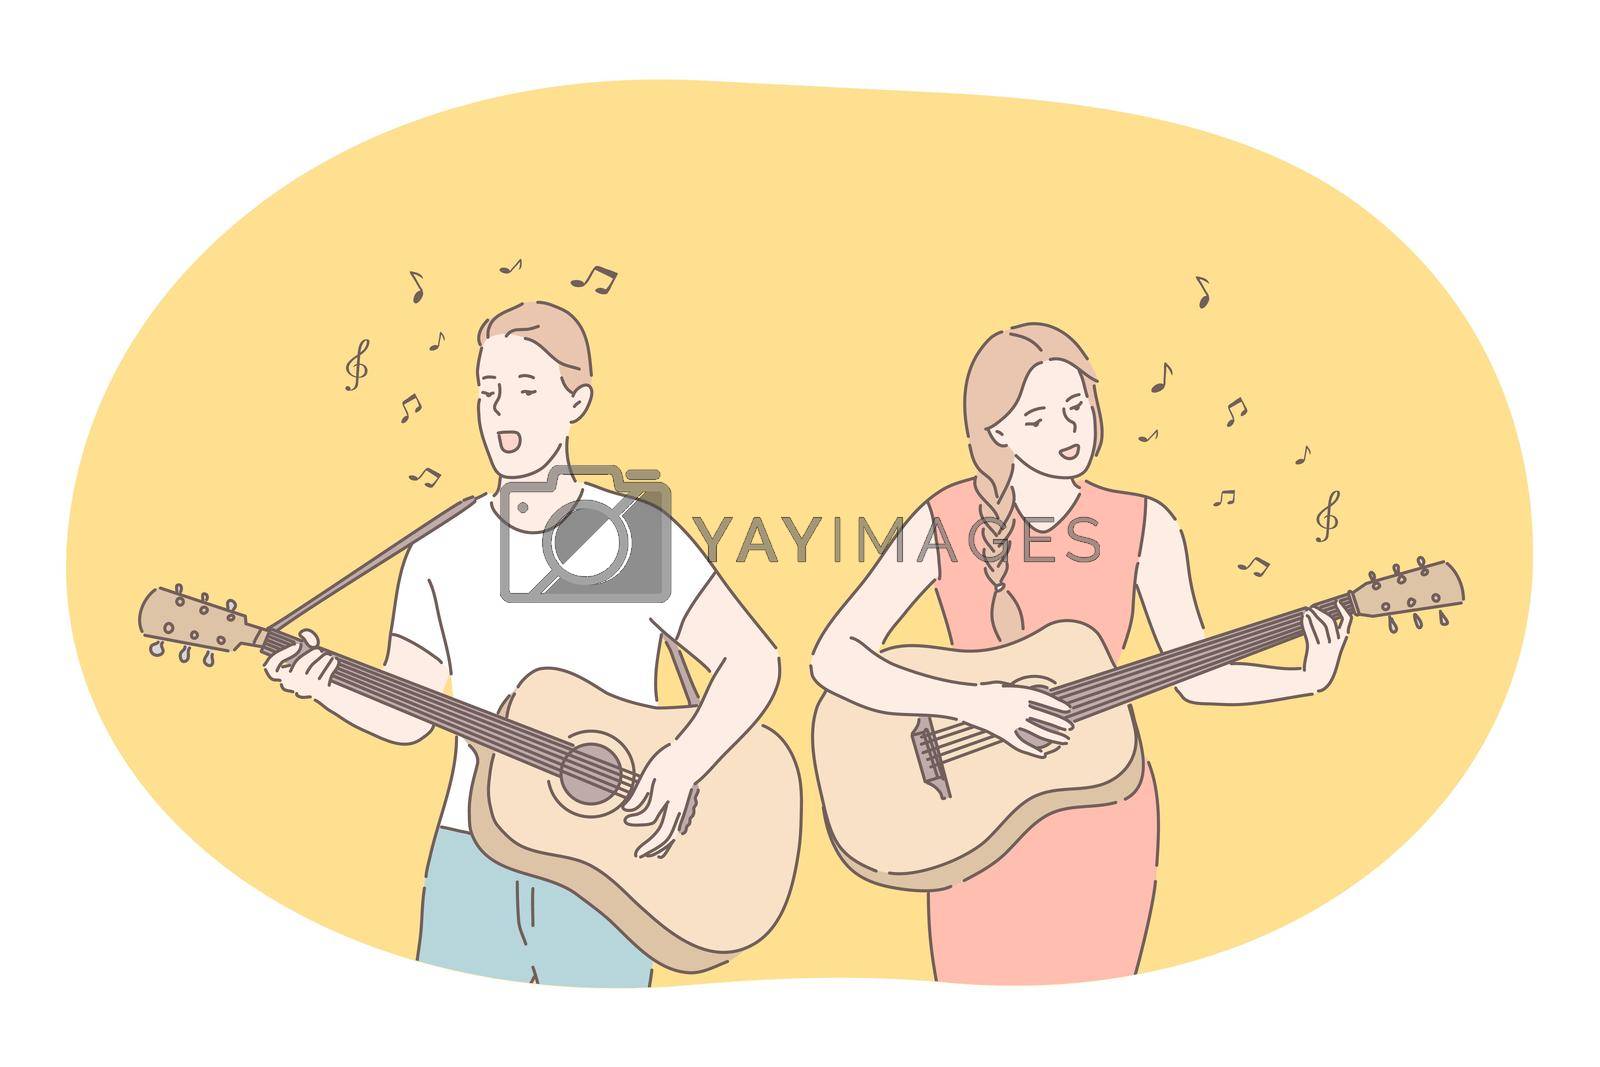 Music, band, playing guitar, singer concept. Young couple man and woman cartoon characters playing guitars and singing together during performance on stage. Music festival, show, singers, melody, song